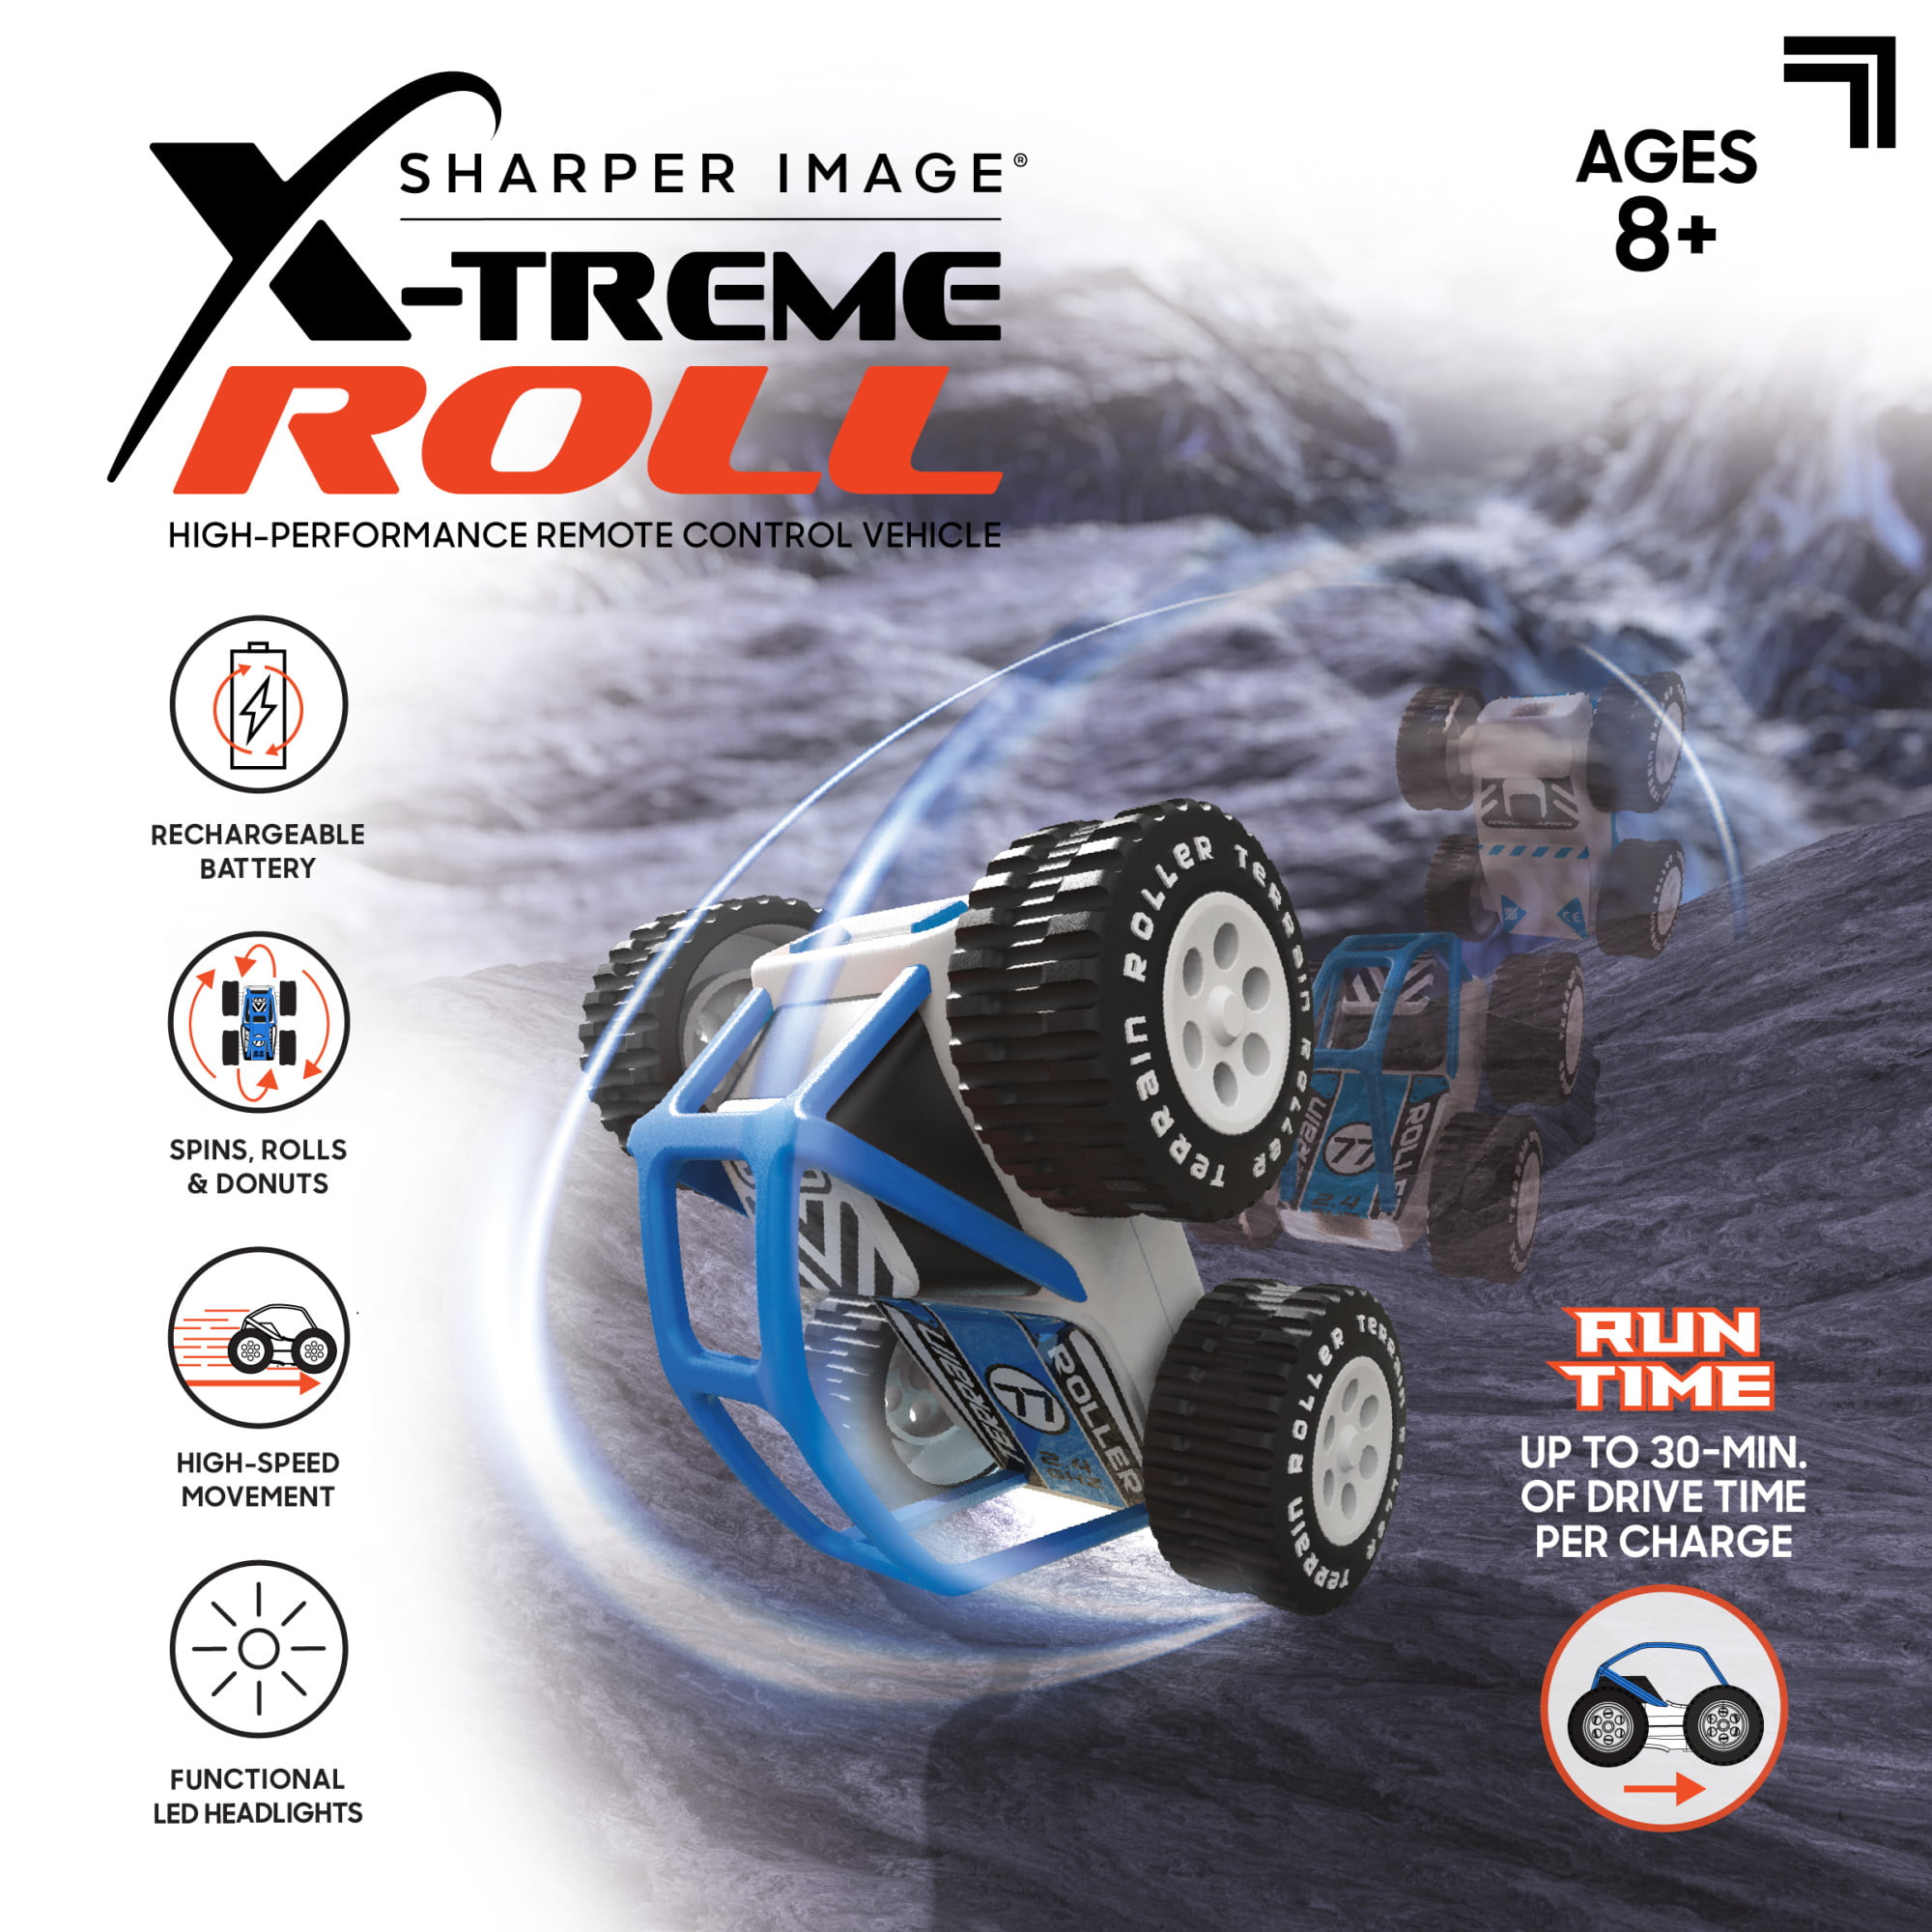 Sharper Image® Toy RC Body Shop Remote Control Demolition Car 2 Pack with  Pop-on Parts, 2.4 GHz Long Range Wireless Control, Blue/Red, Age 6+ 